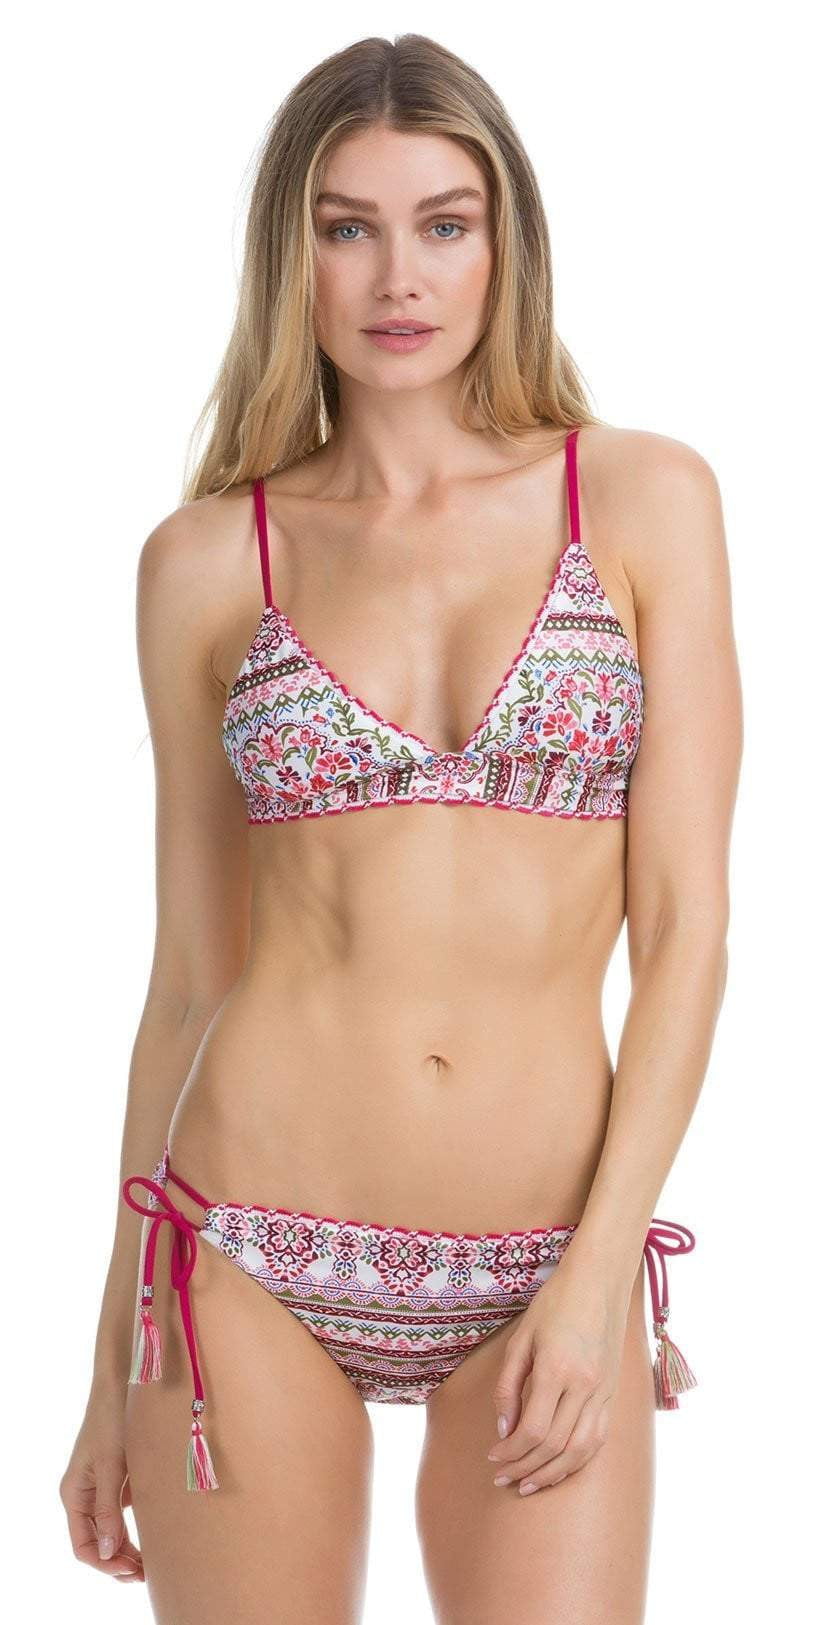 South Beach Swimsuits Becca Swimsuits and Bikinis – South Beach Swimsuits